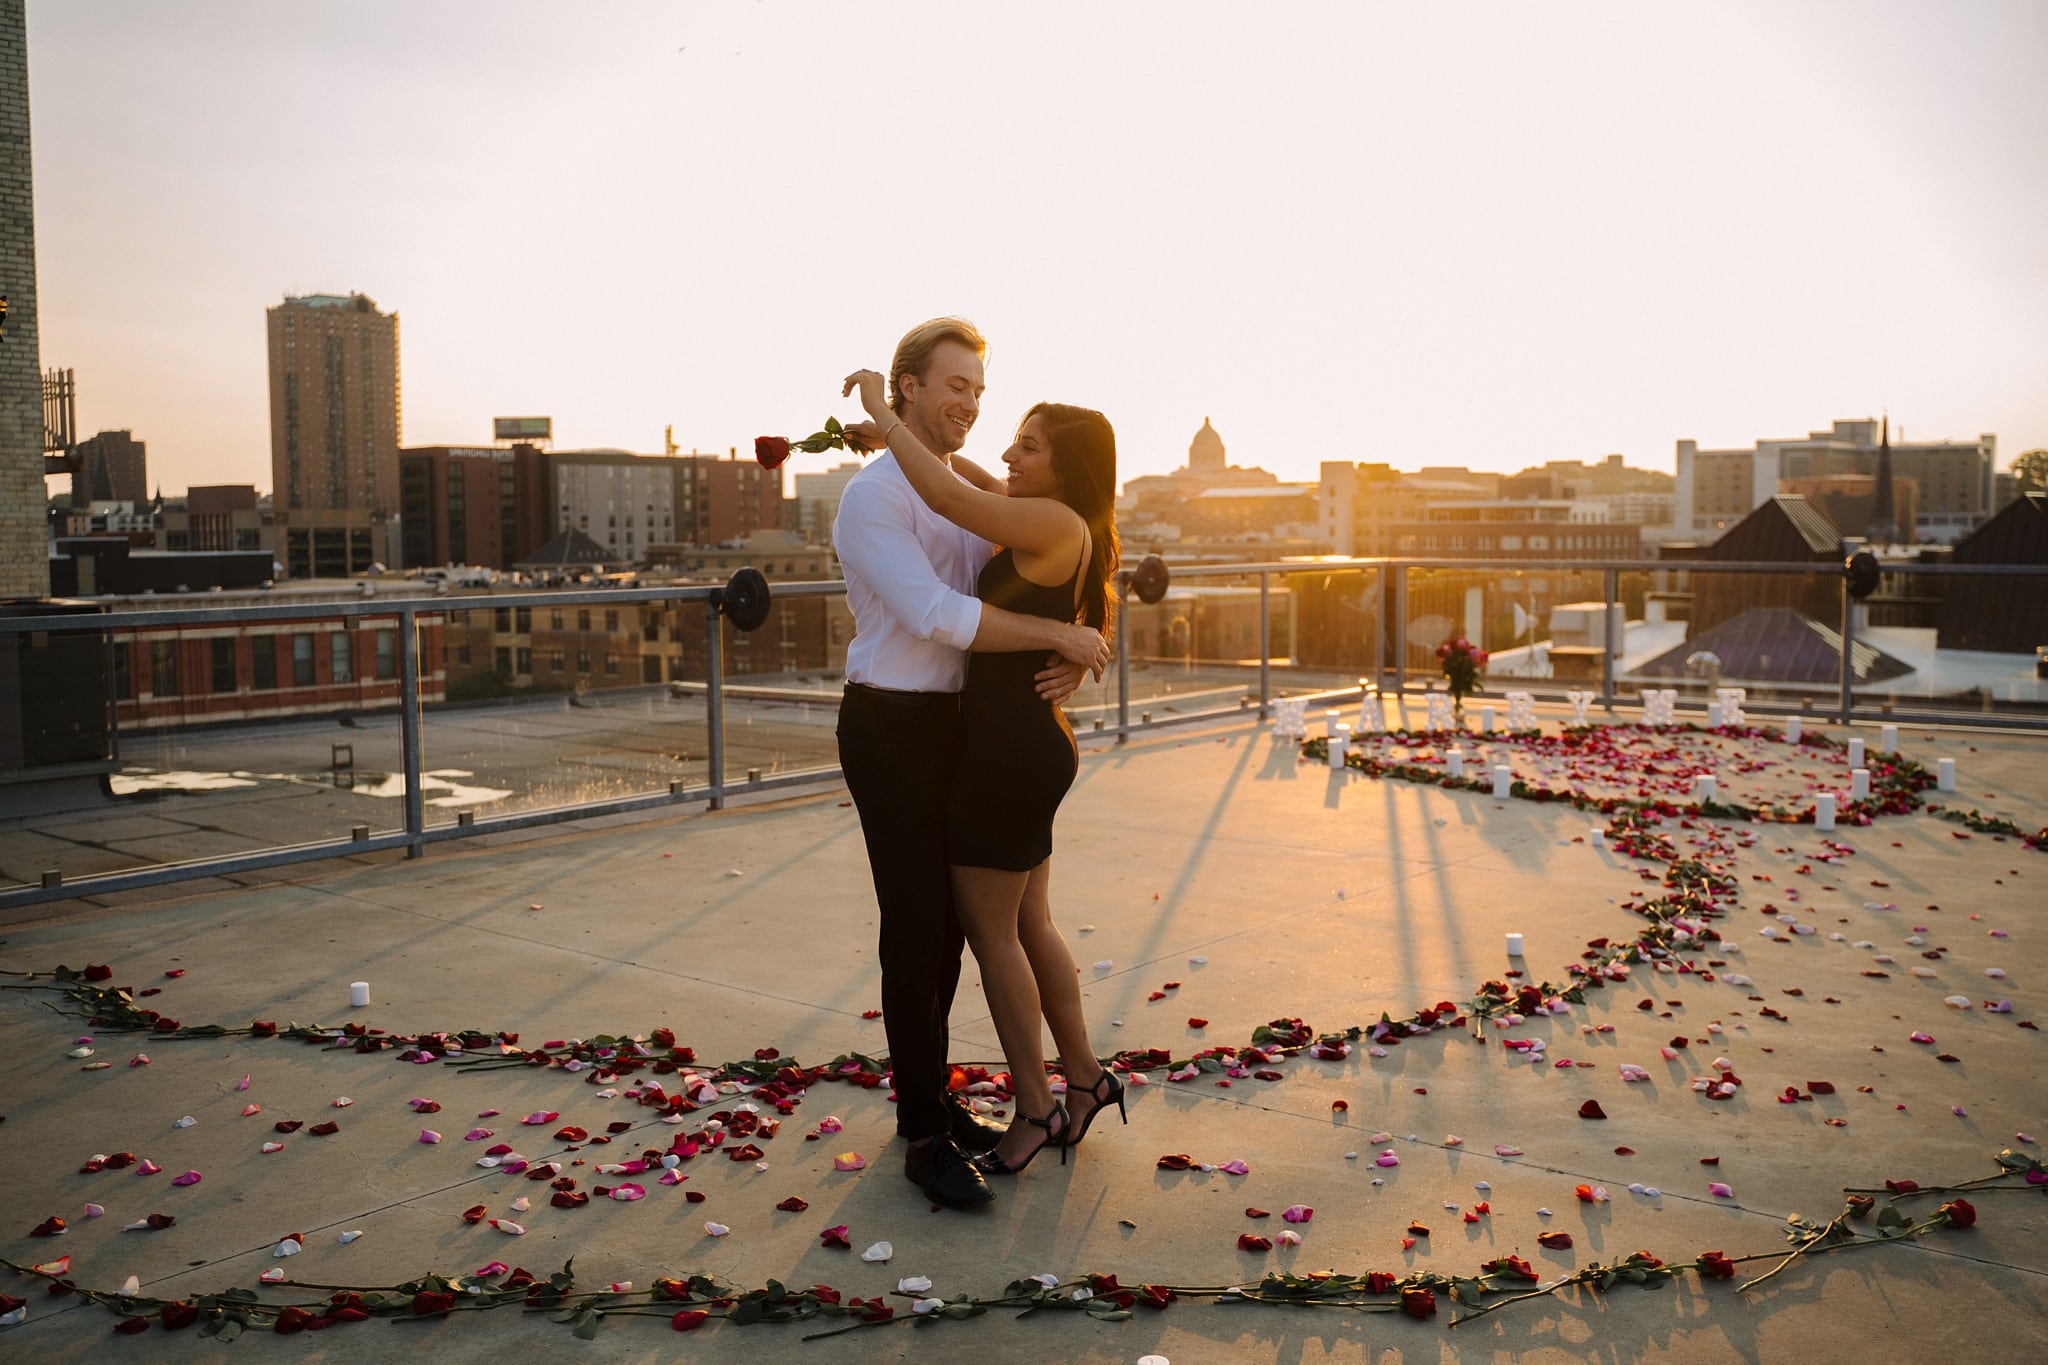 engaged couple embracing with rose petals